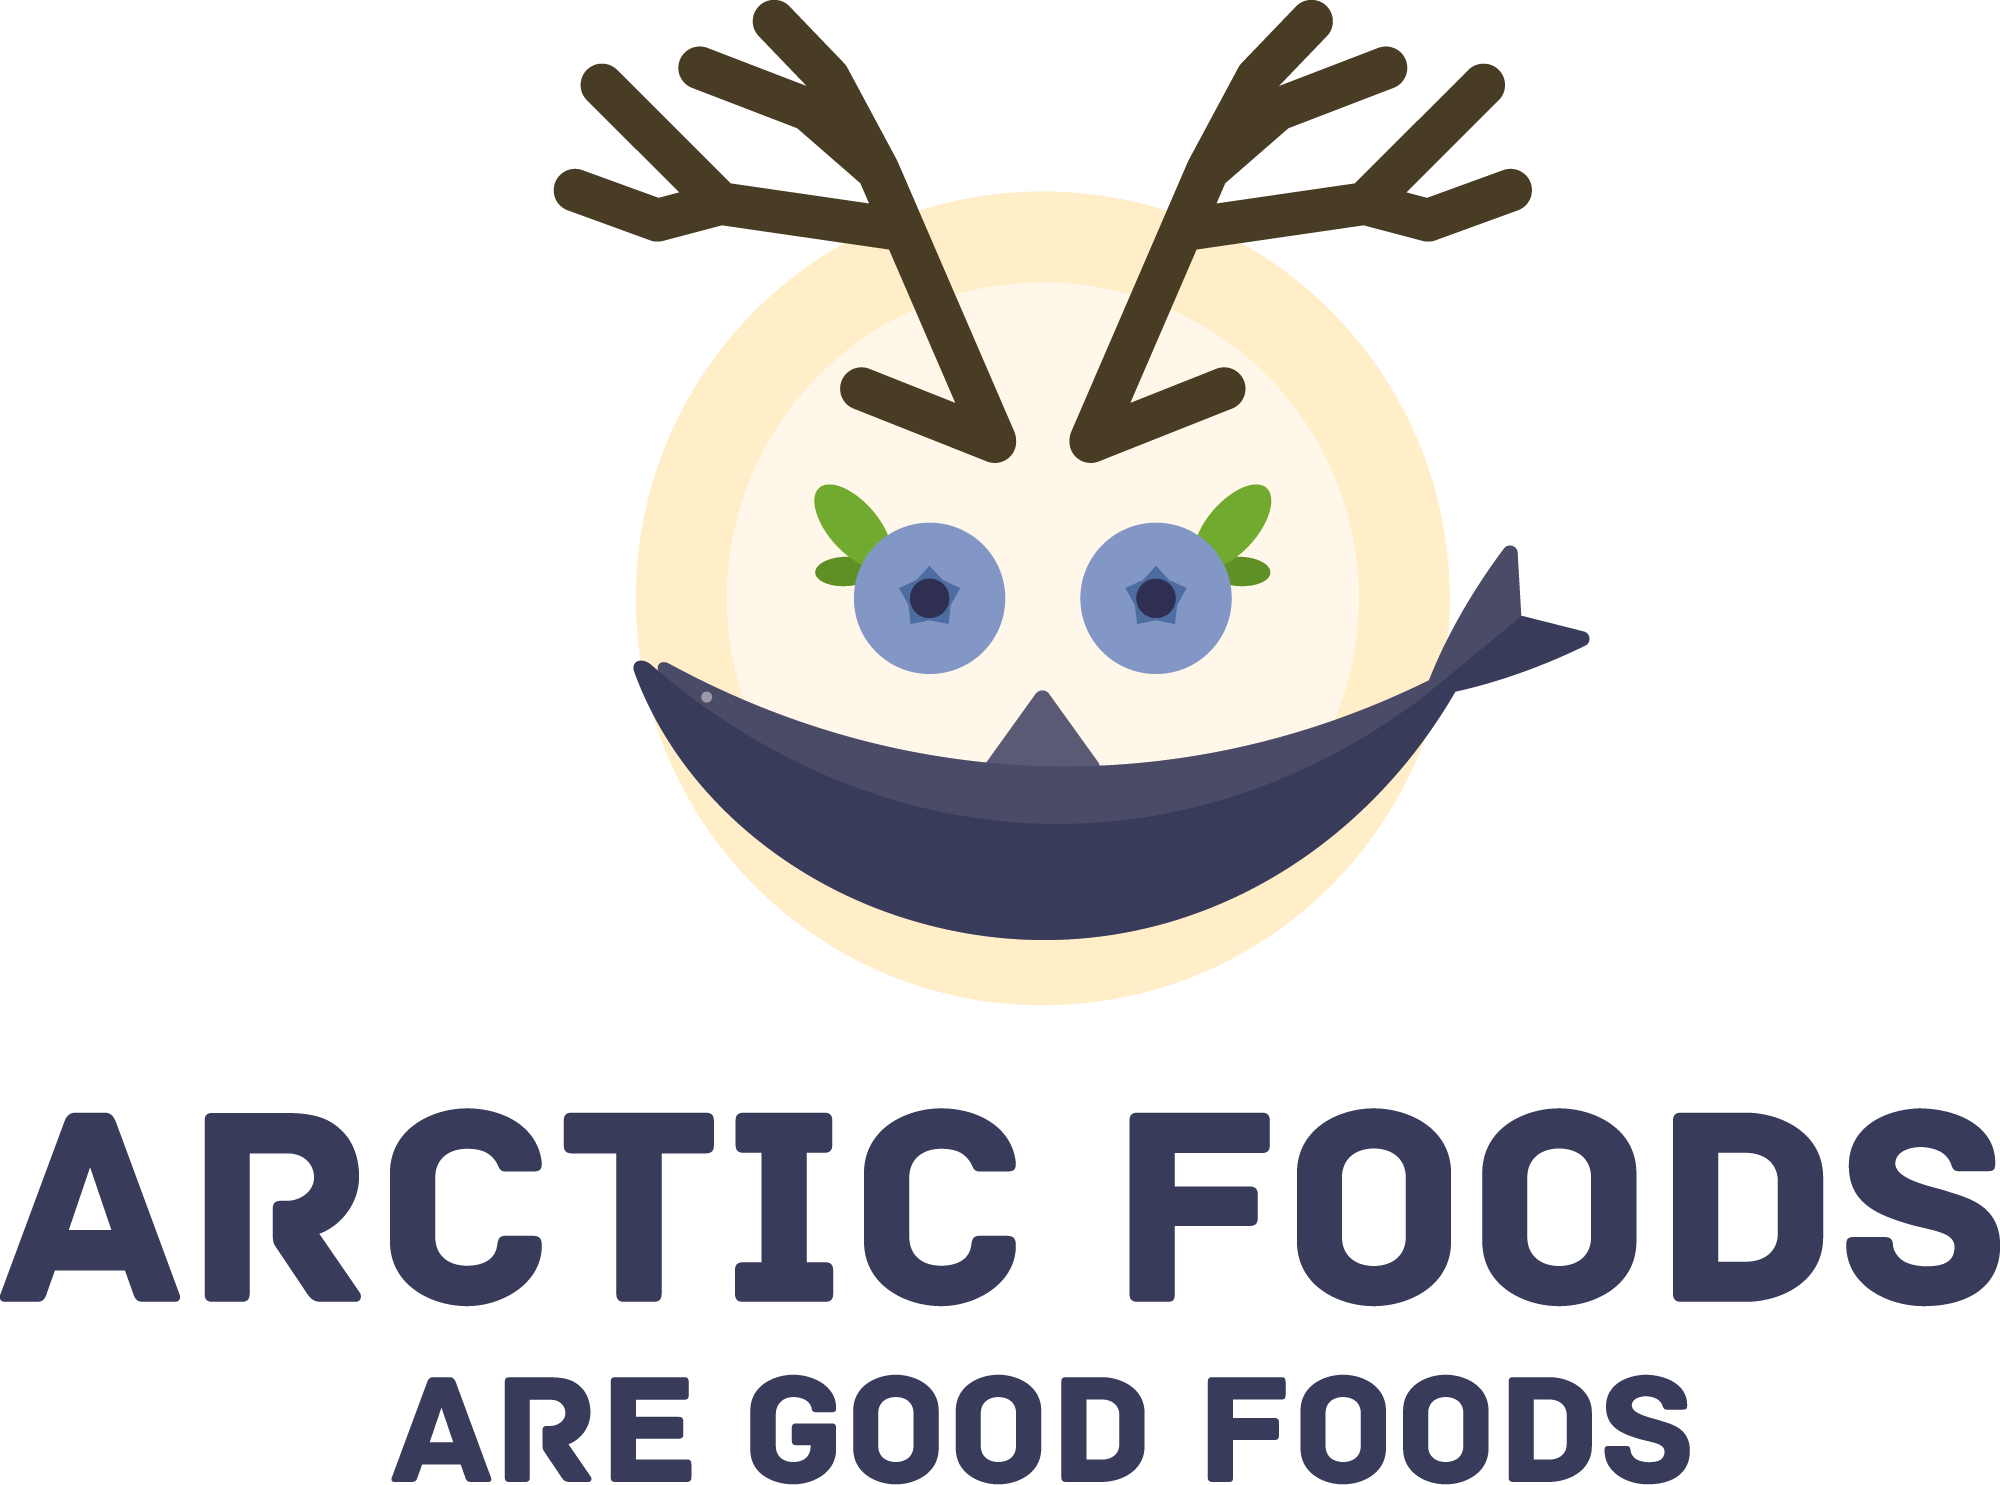 Arctic Foods are Good Foods